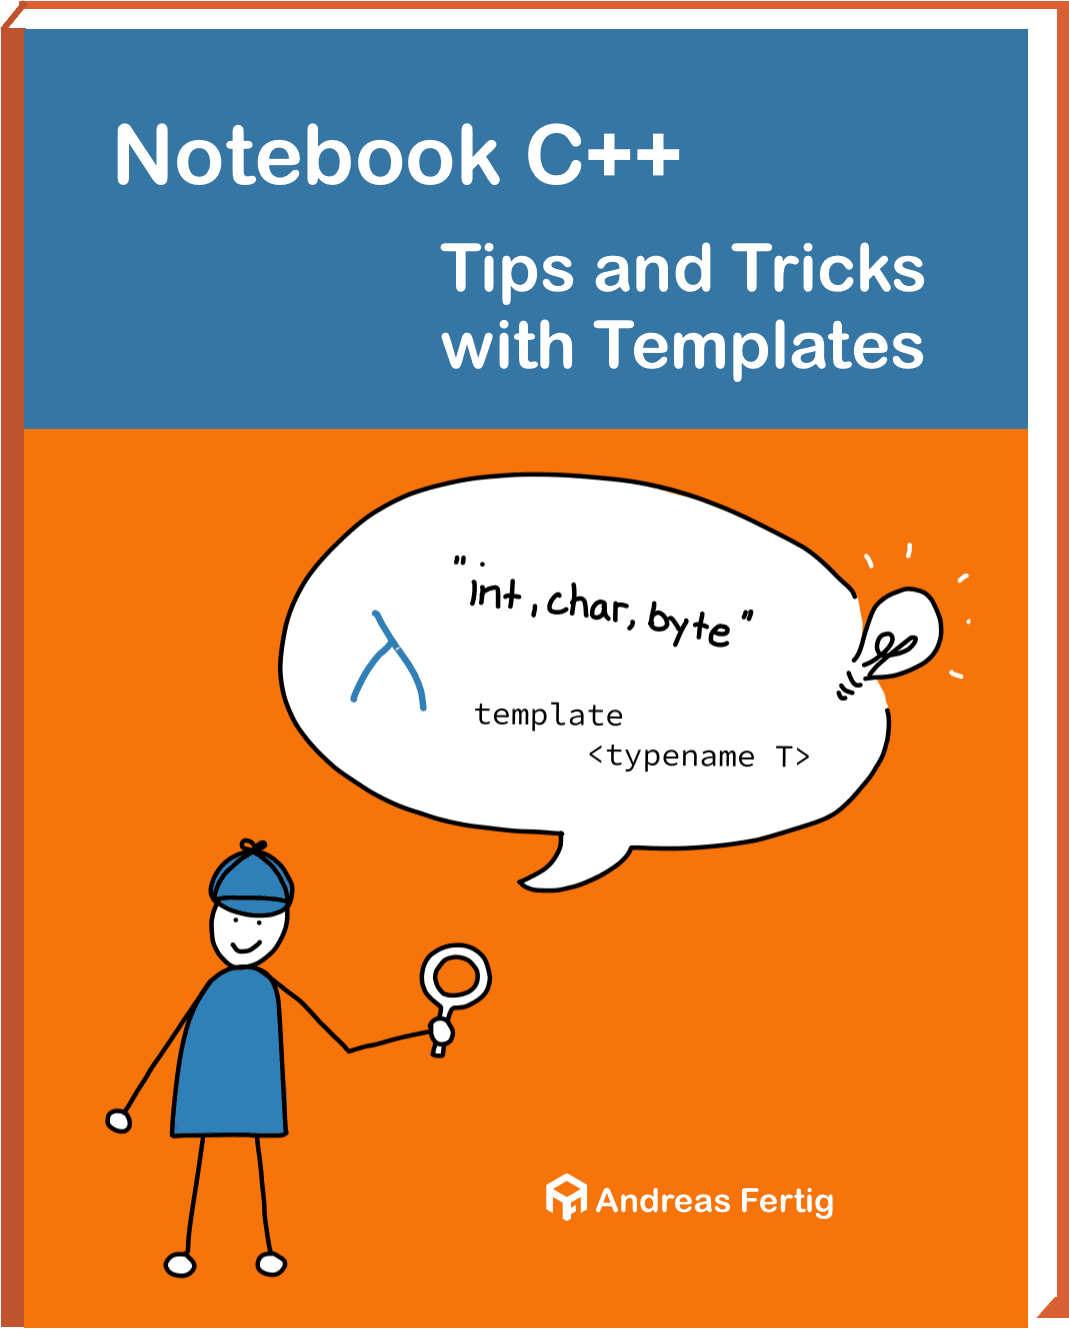 Notebook C++ - Tips and Tricks with Templates